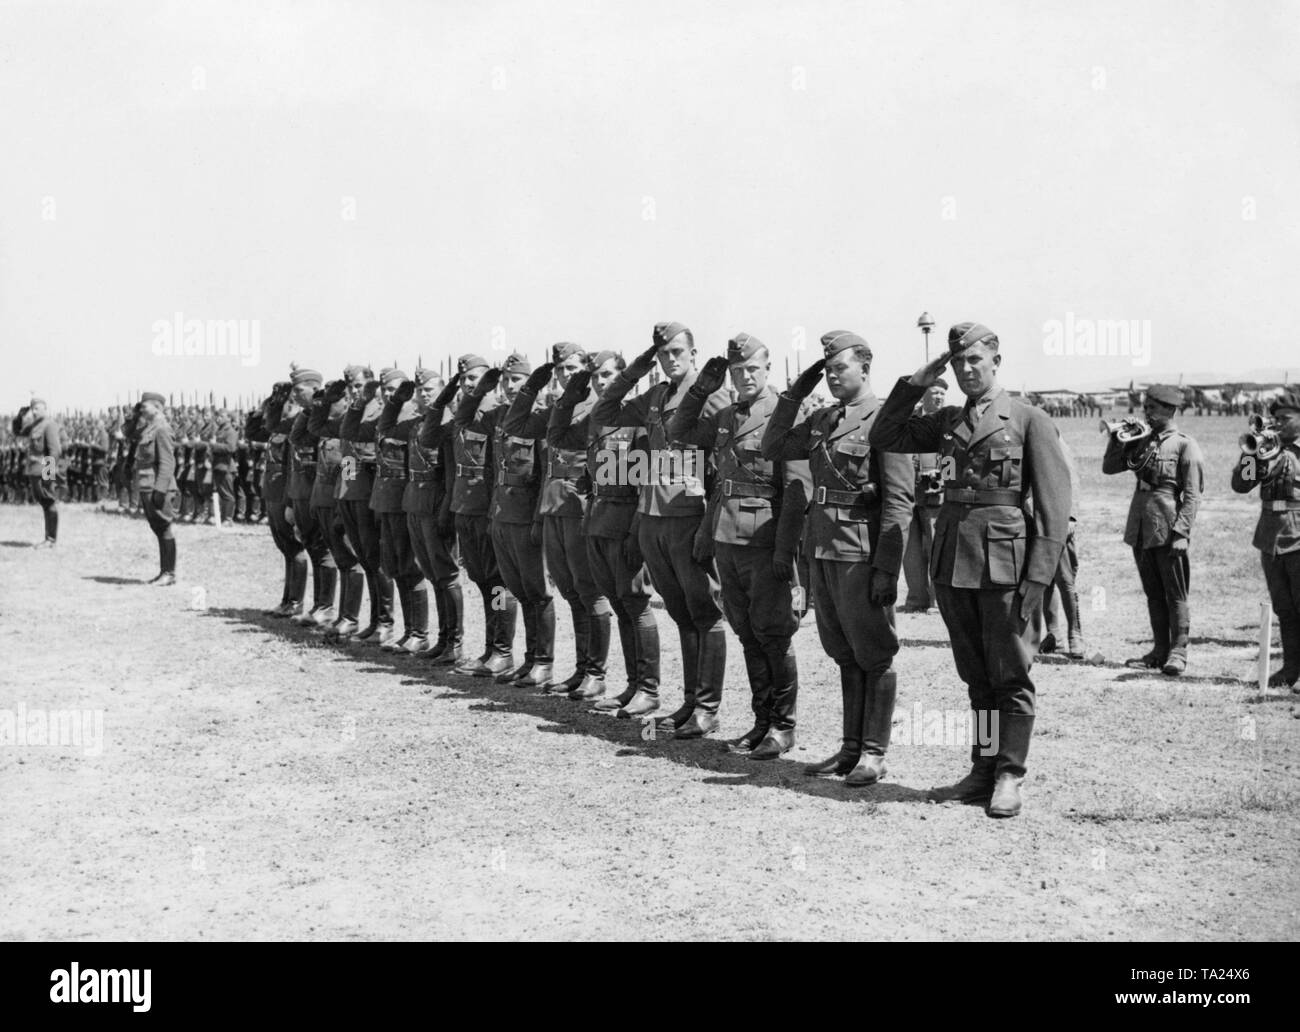 Photo of a group of German Luftwaffe (air force) officers of the Condor Legion saluting the Spanish Caudillo General Francisco Franco during a victory parade on occasion of the invasion of Madrid at Barajas airport, Madrid on March 28, 1939. Other soldiers and Spanish trumpeters have lined up as well. There are aircrafts in the background. Stock Photo